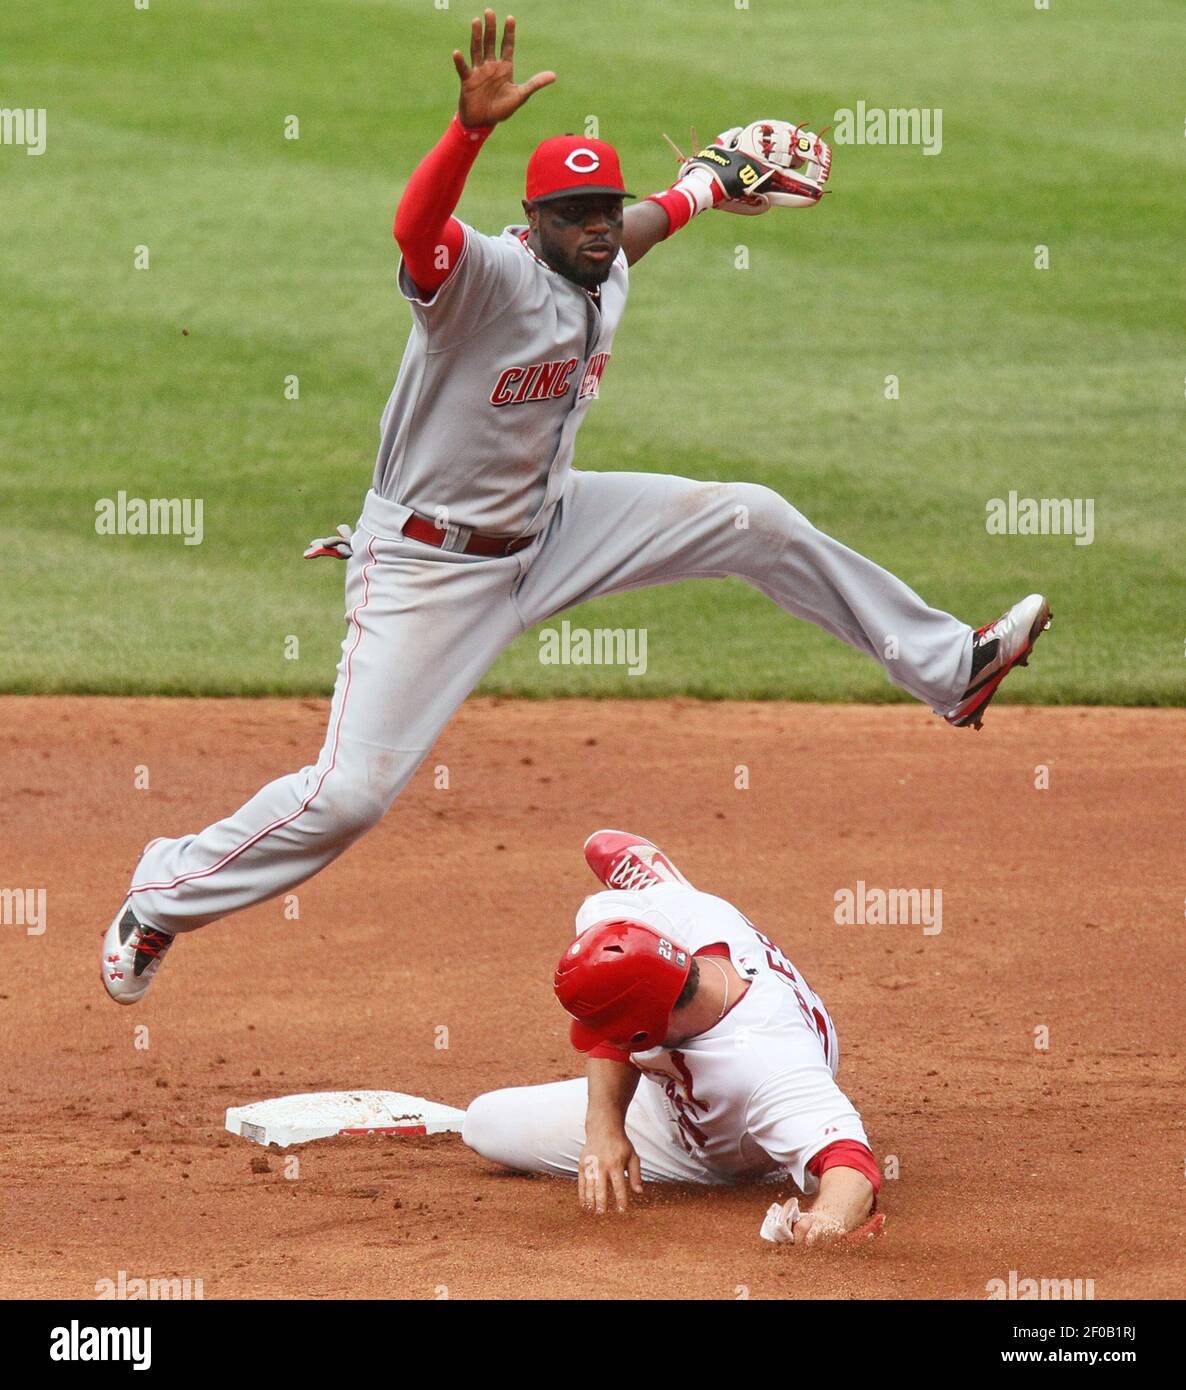 Cincinnati Reds second baseman Brandon Phillips, top, turns the double-play  as the St. Louis Cardinals' David Freese tries to break it up in the second  inning at Busch Stadium in St. Louis